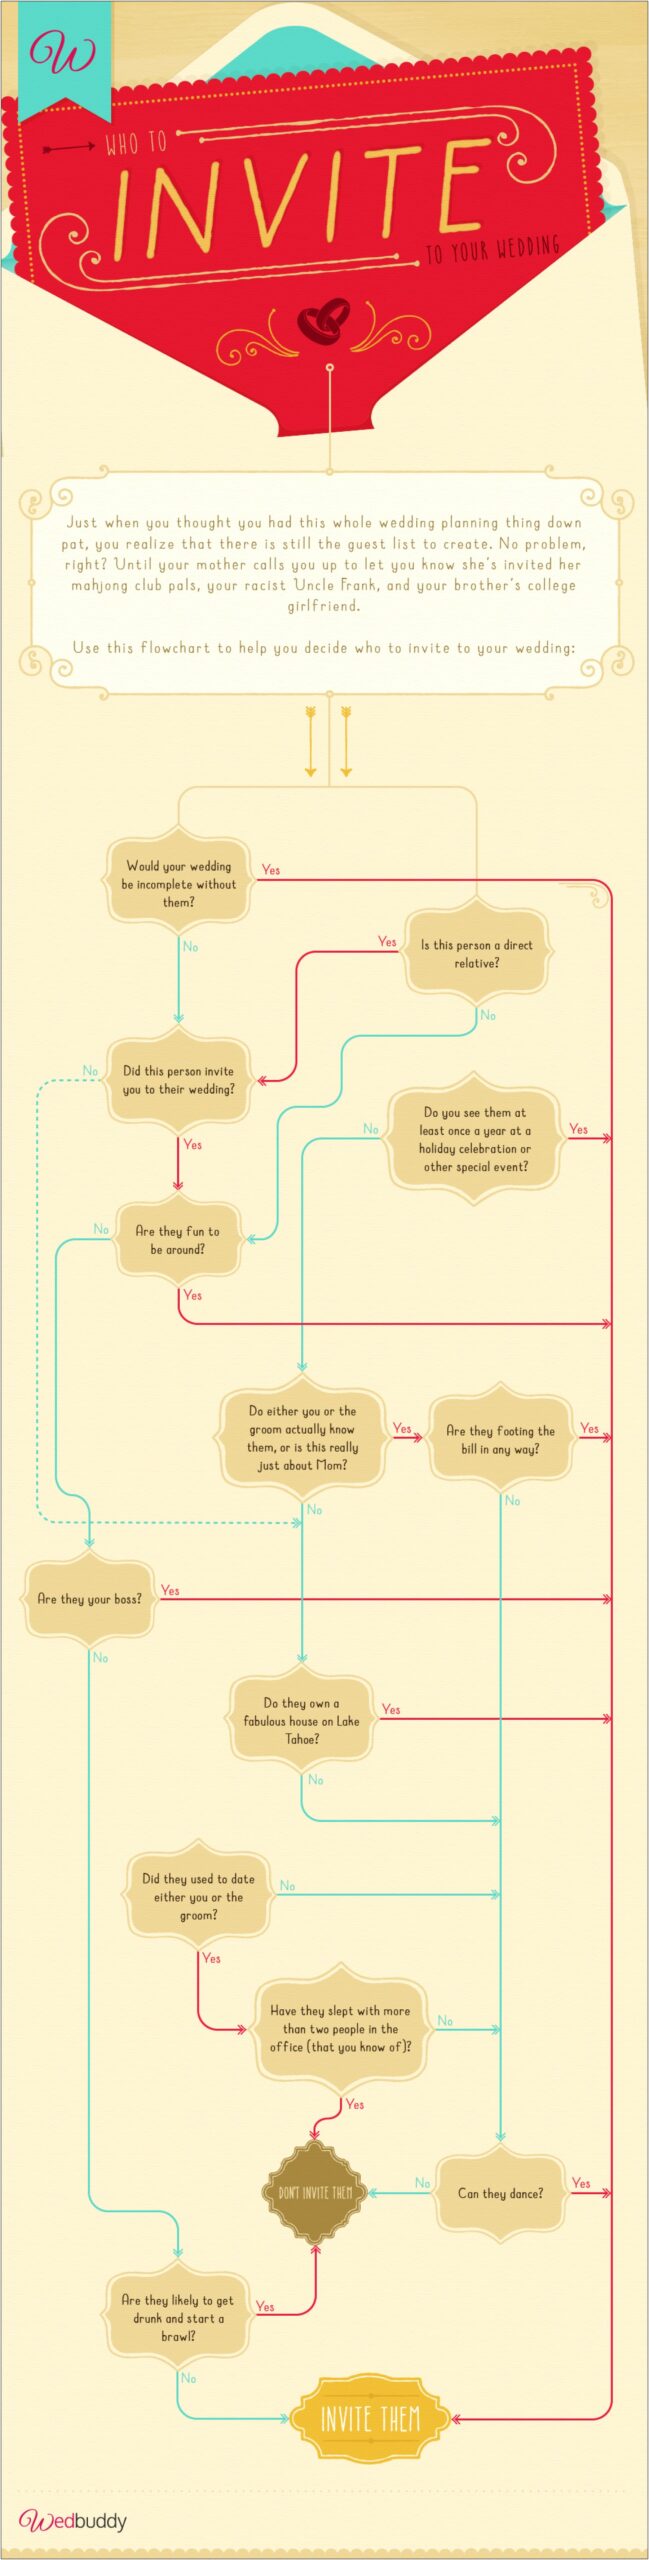 Should You Invite Your Boss To Your Wedding